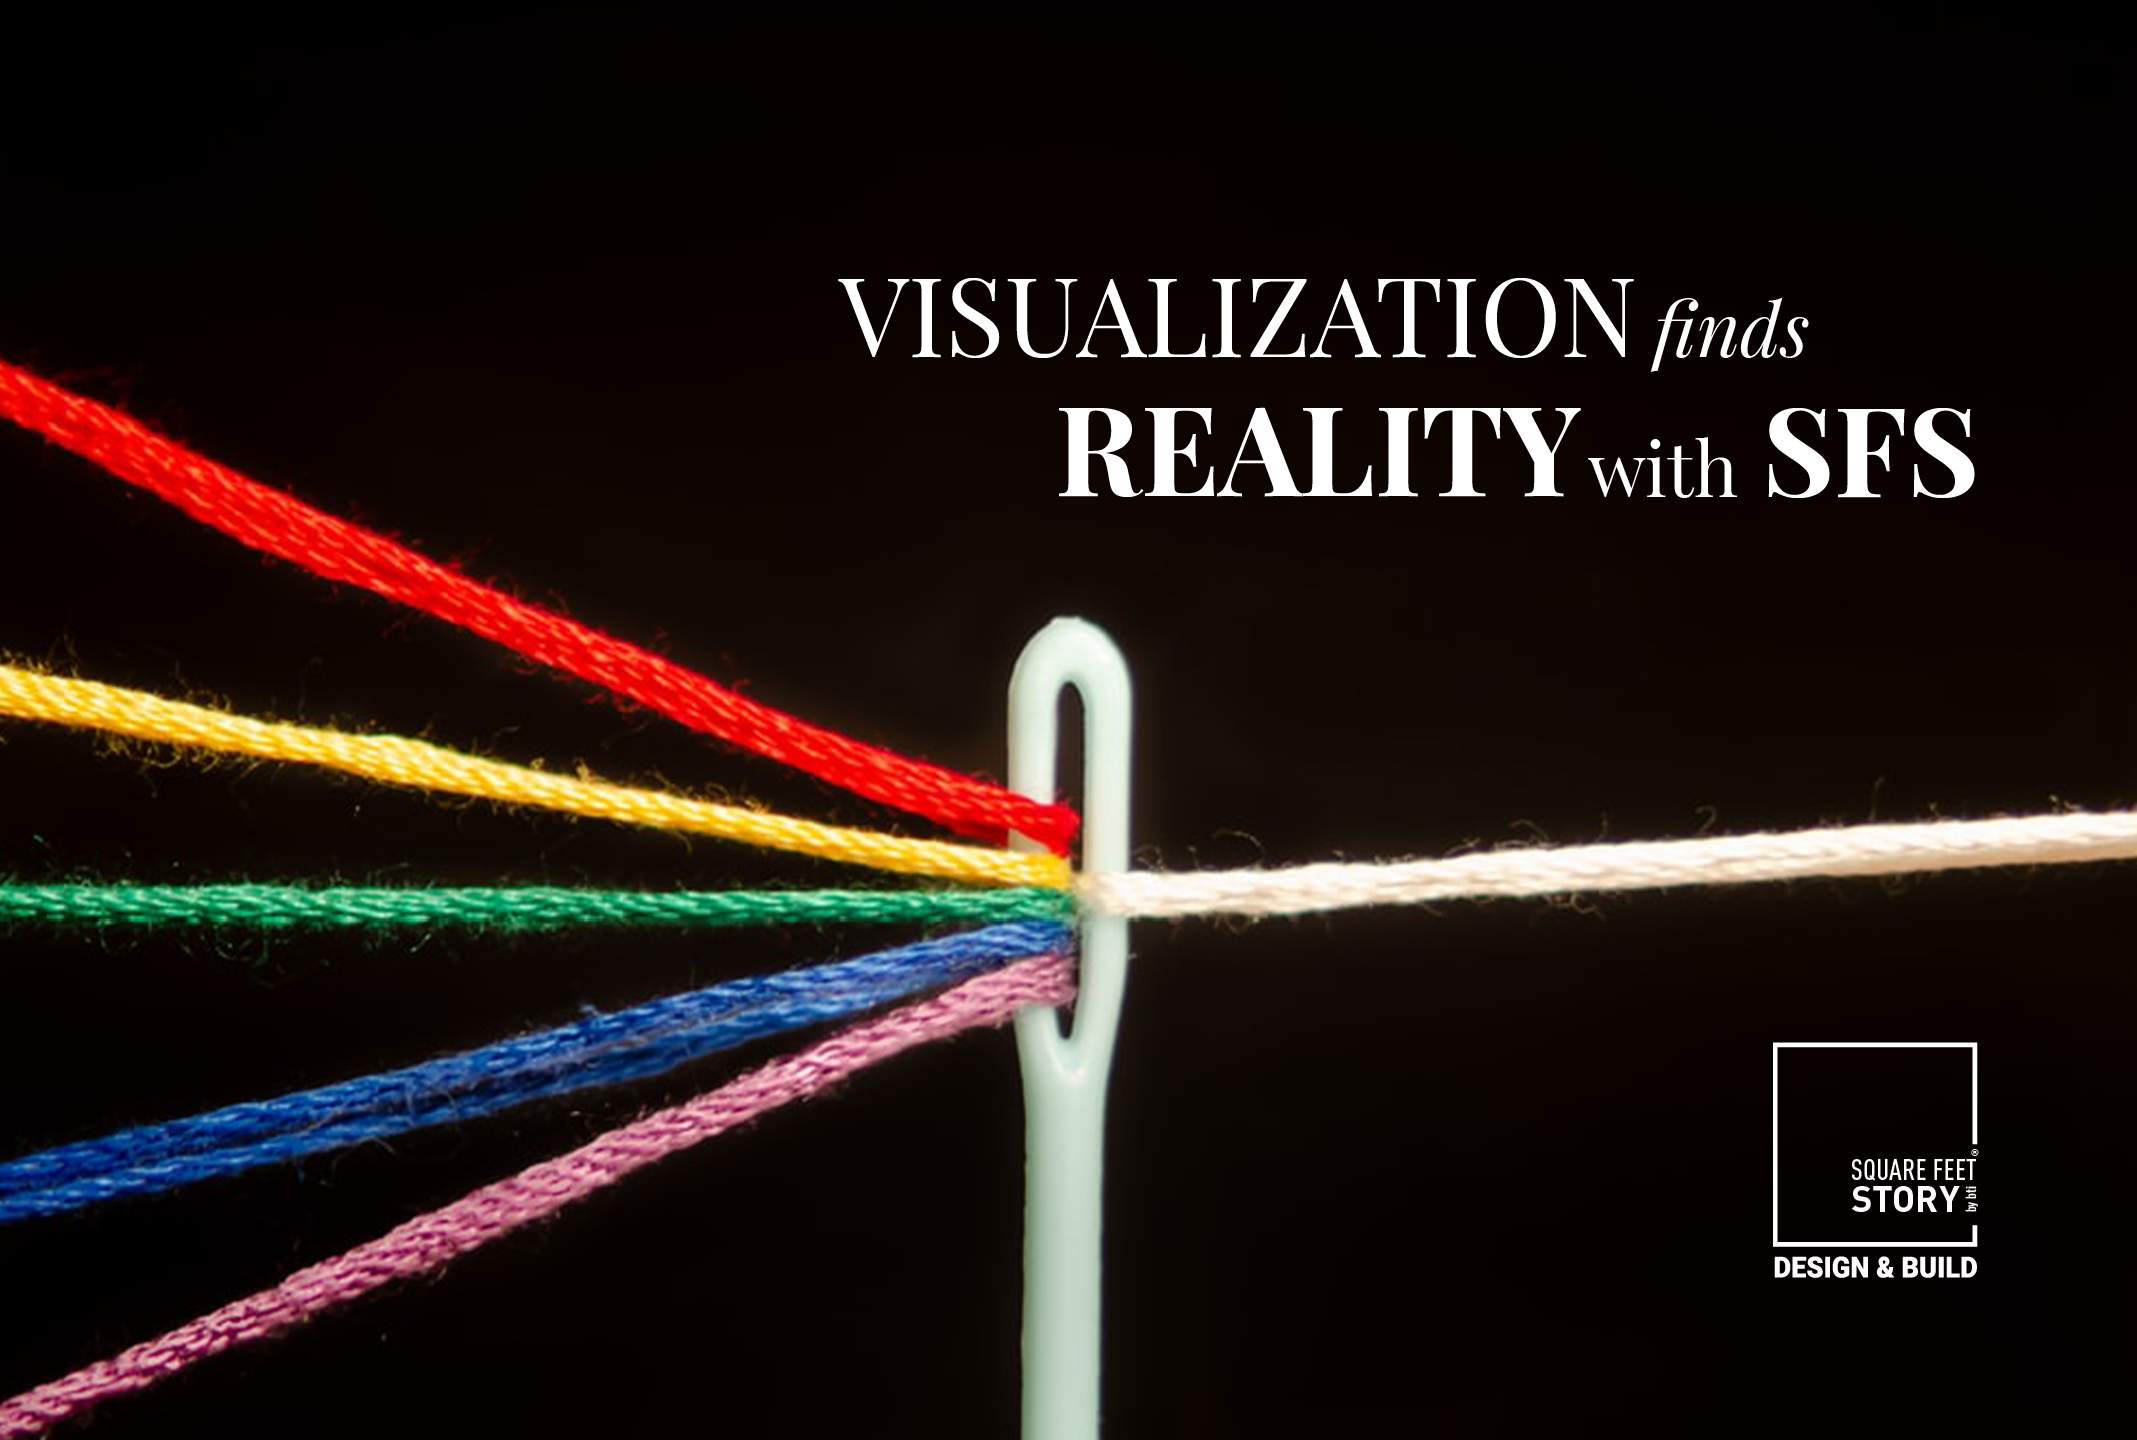 Visualization Finds Reality with SFS